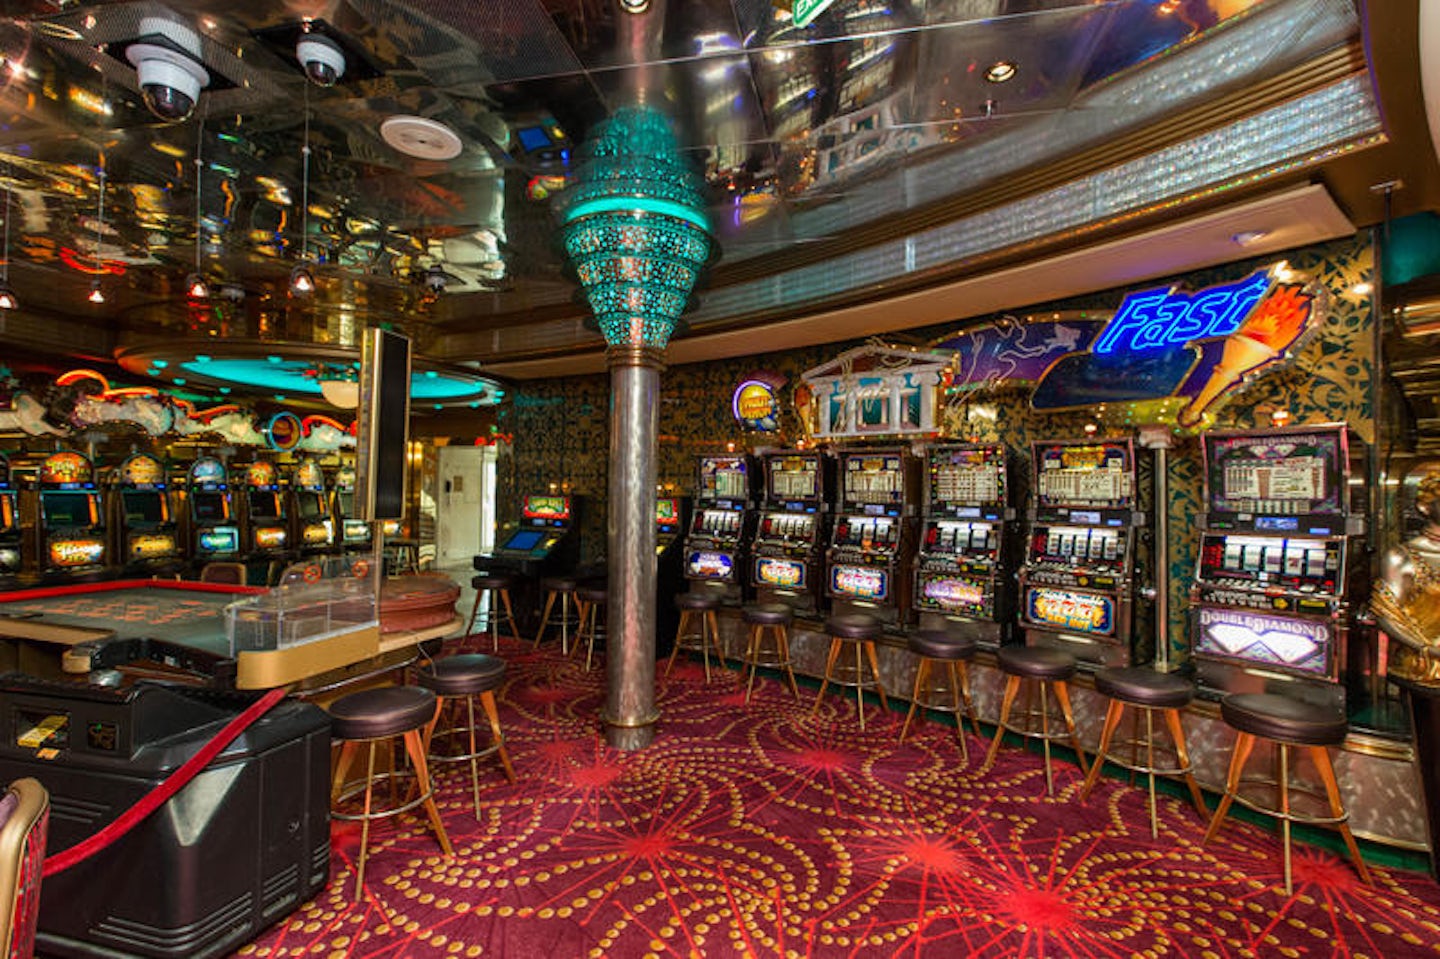 Casino Royale on Vision of the Seas